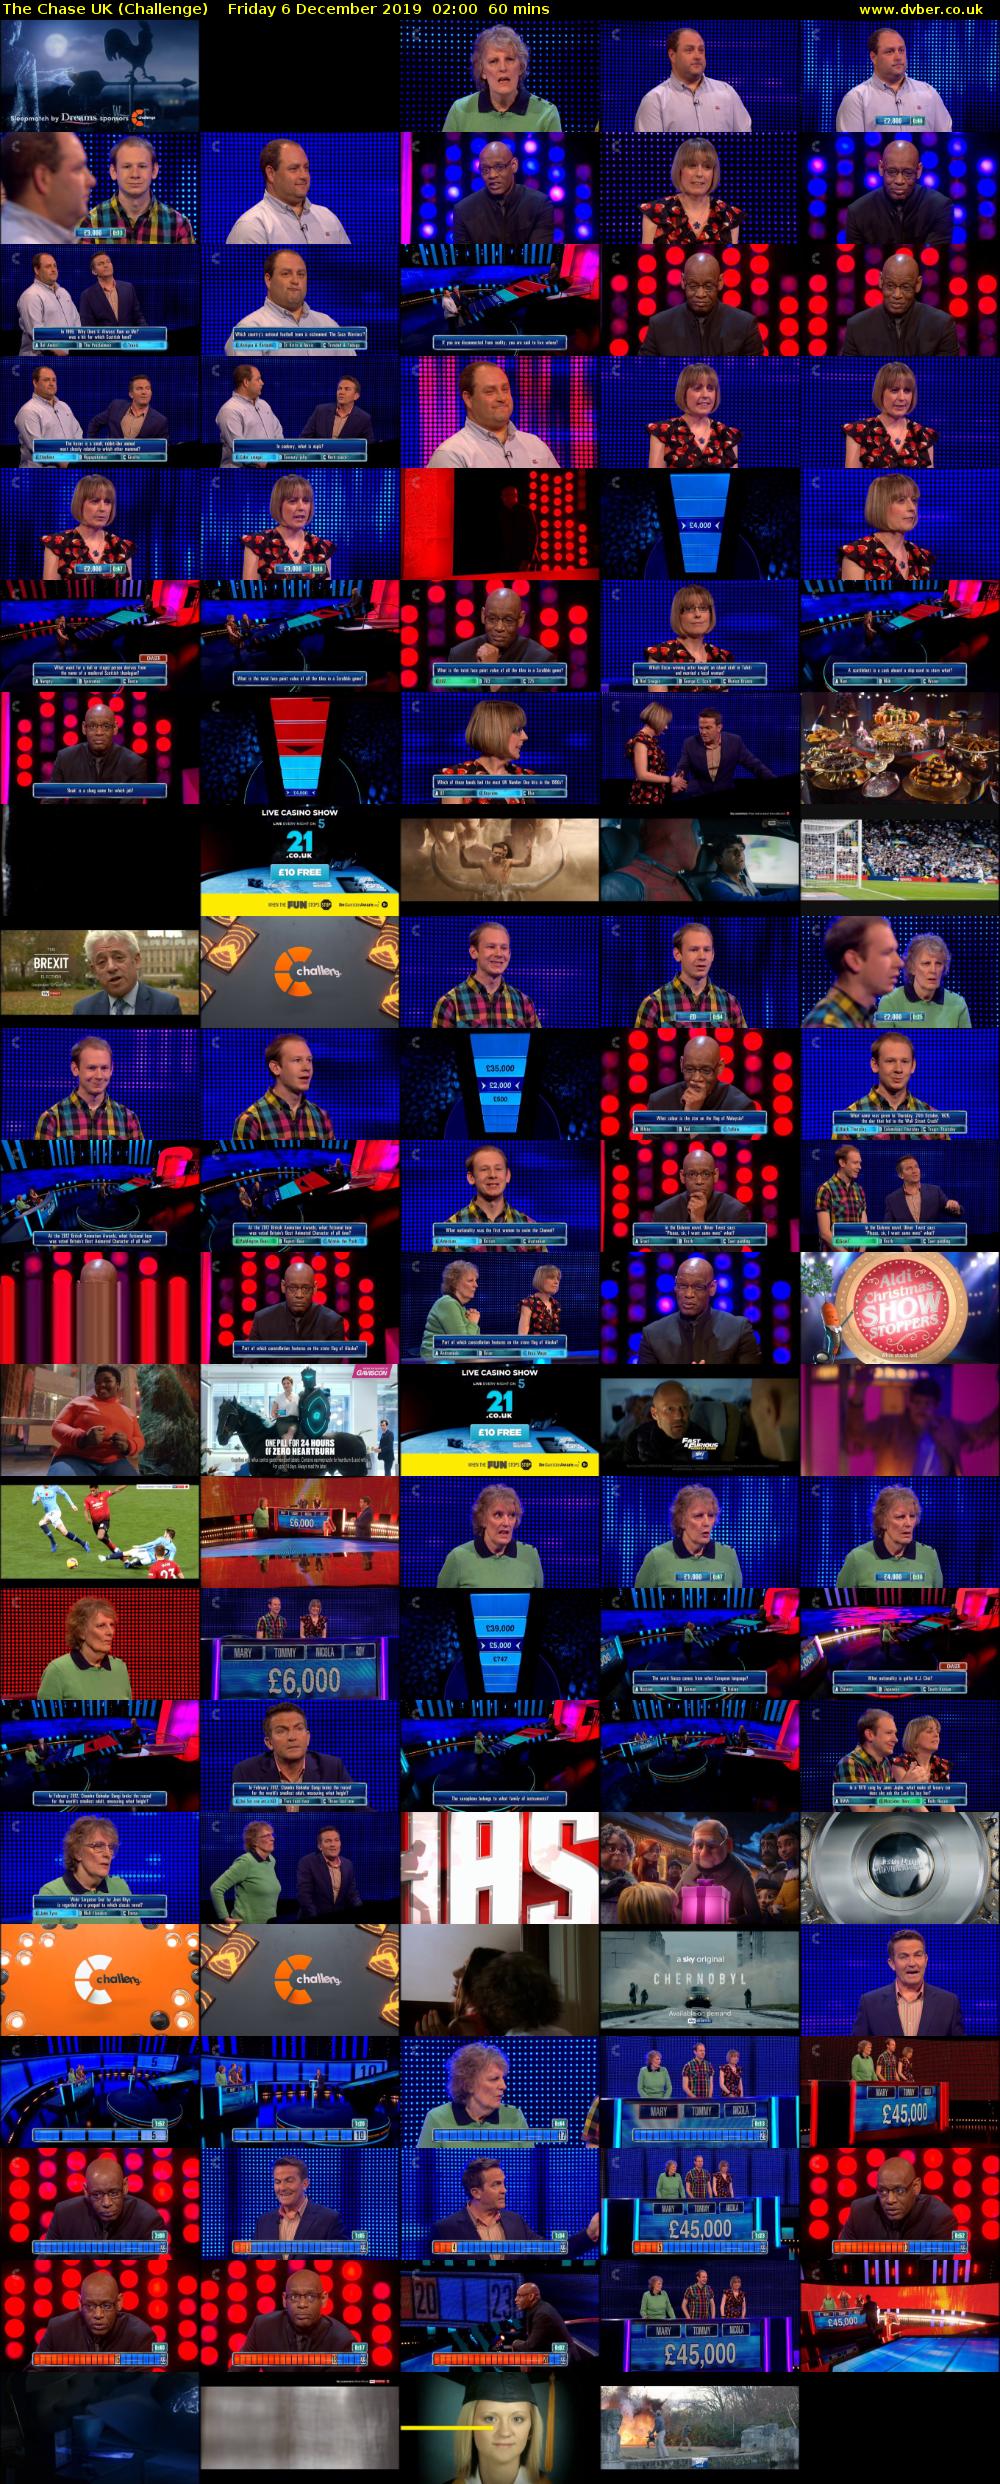 The Chase UK (Challenge) Friday 6 December 2019 02:00 - 03:00